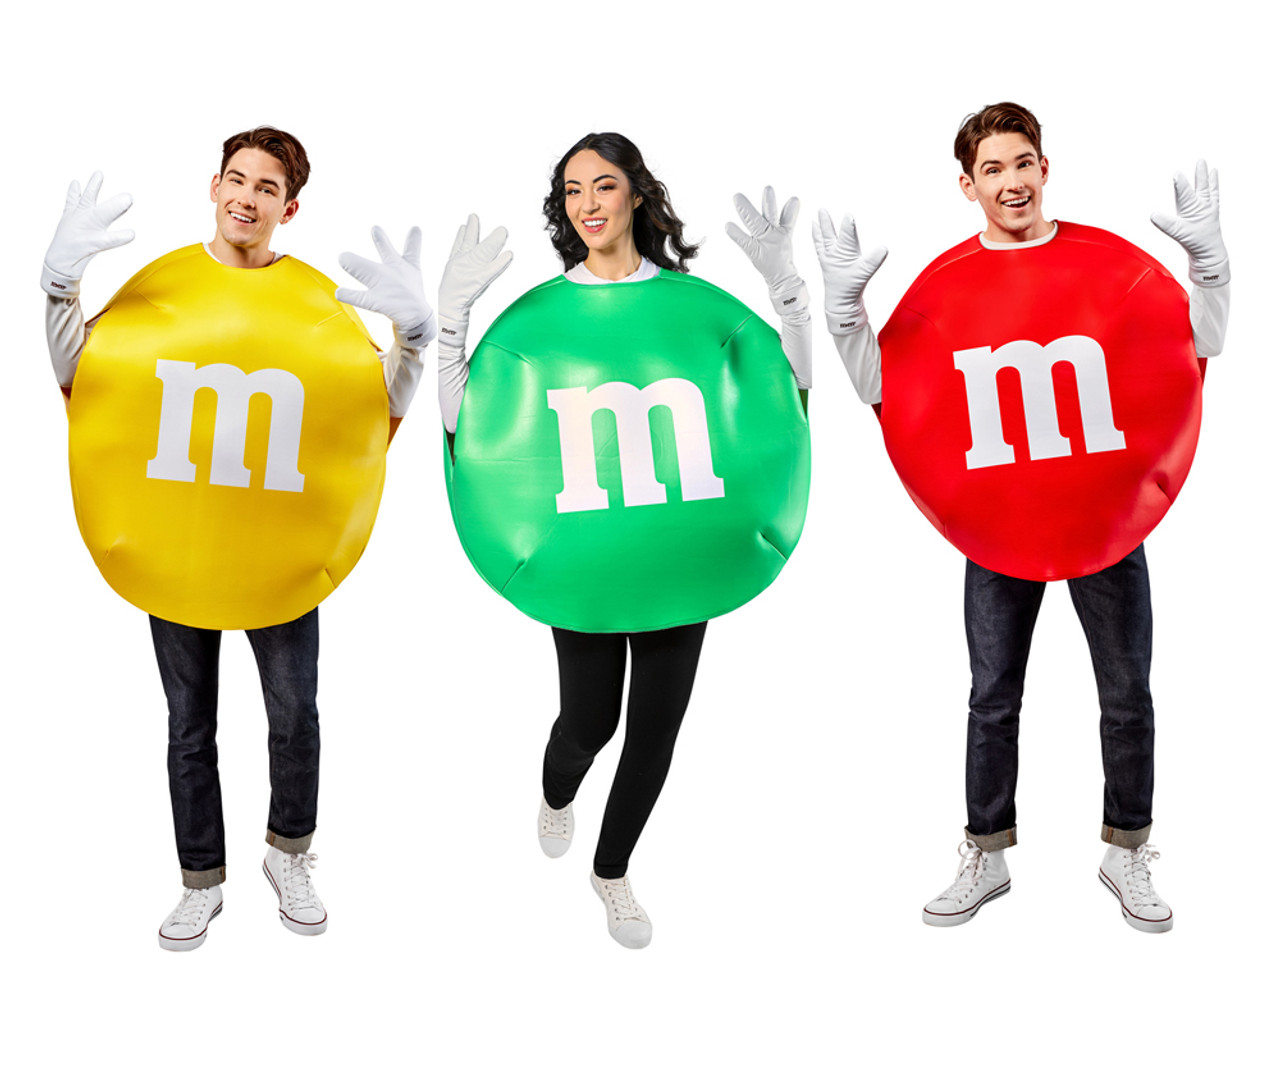 M&M's Costumes for Halloween 